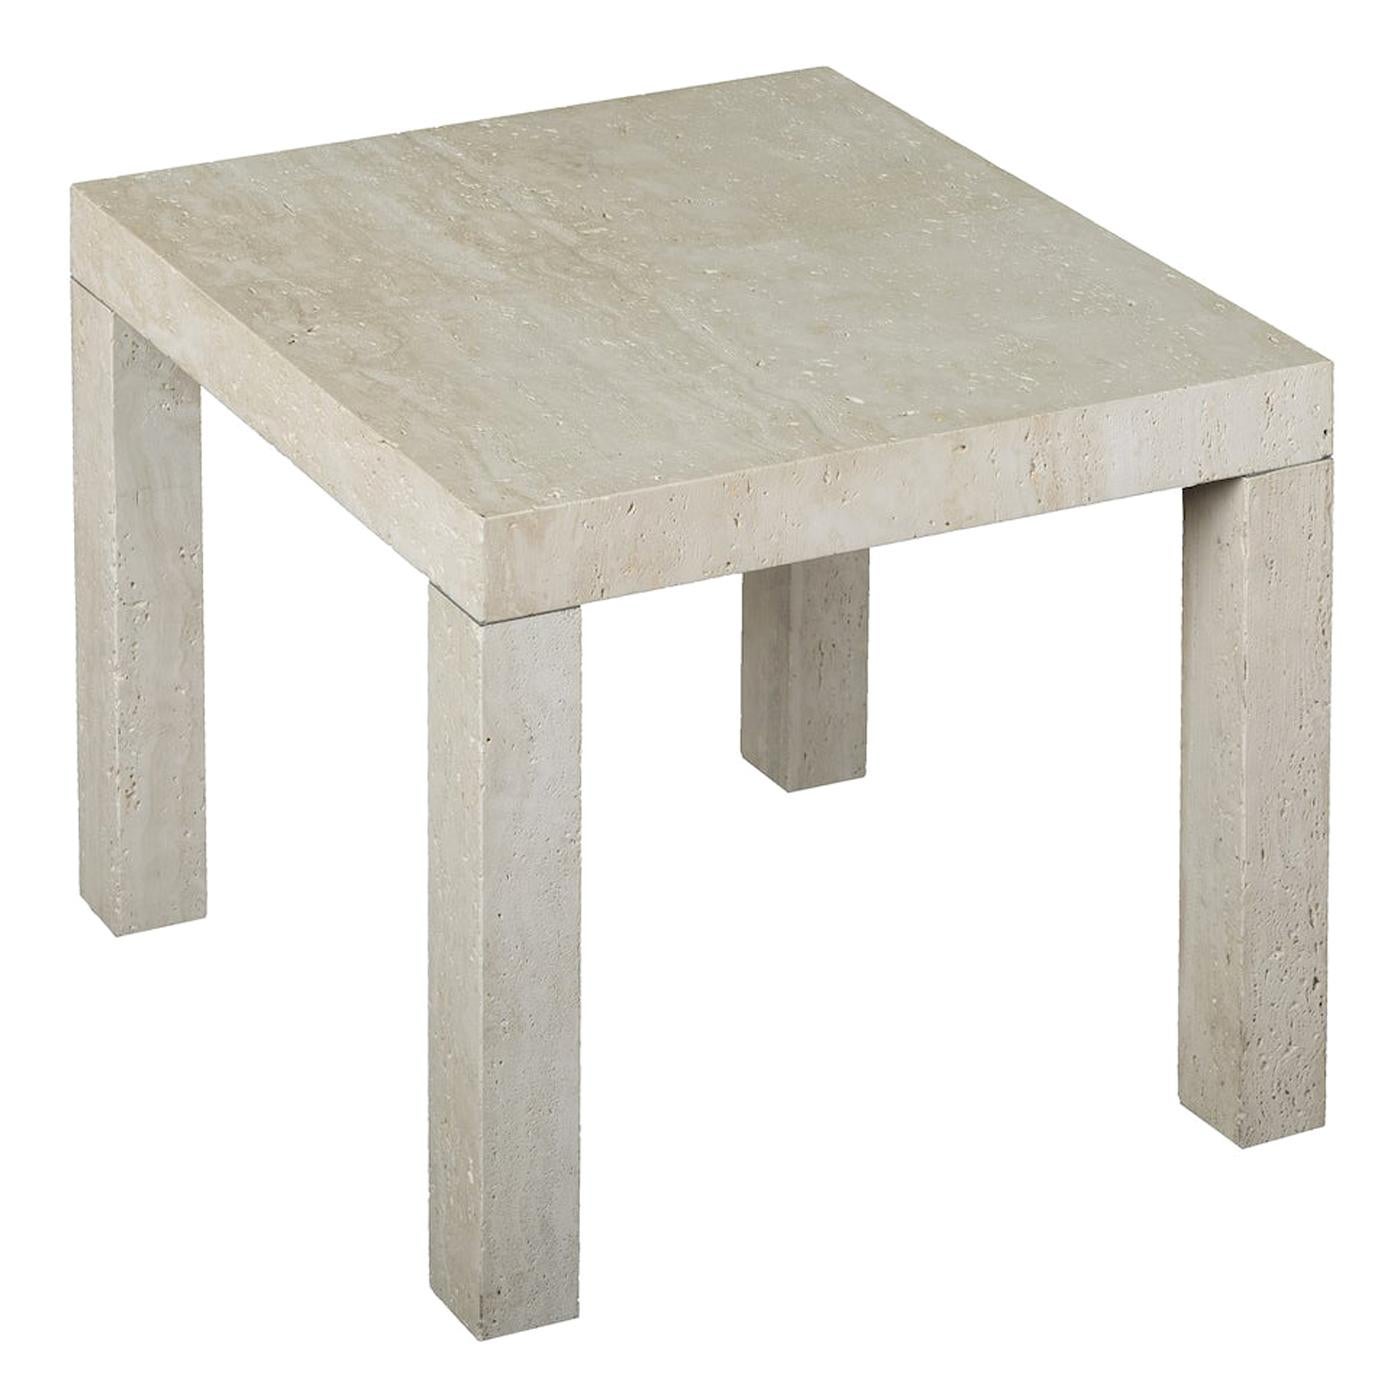 Small Smoke Side Table in Beige Travertine Marble